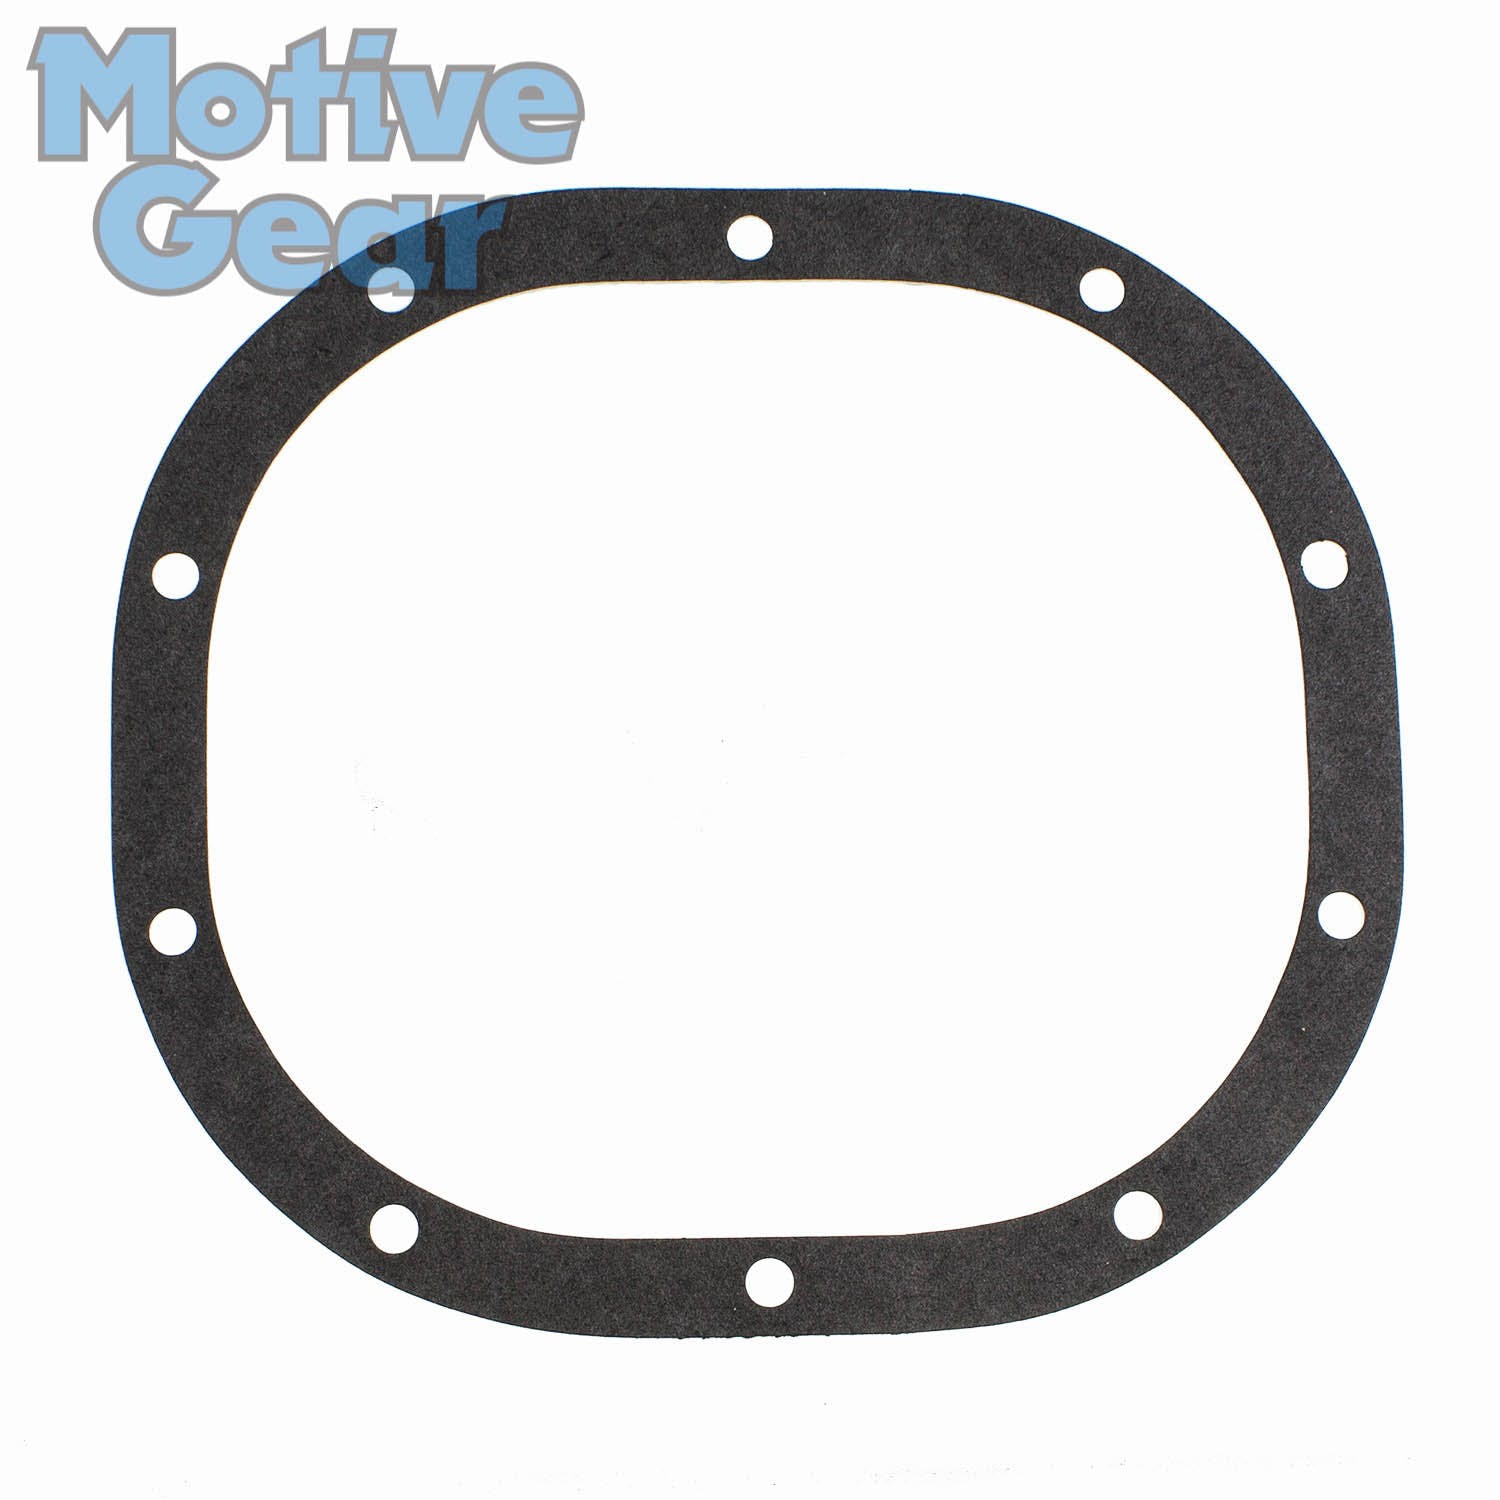 Motive Gear 5123 Differential Cover Gasket